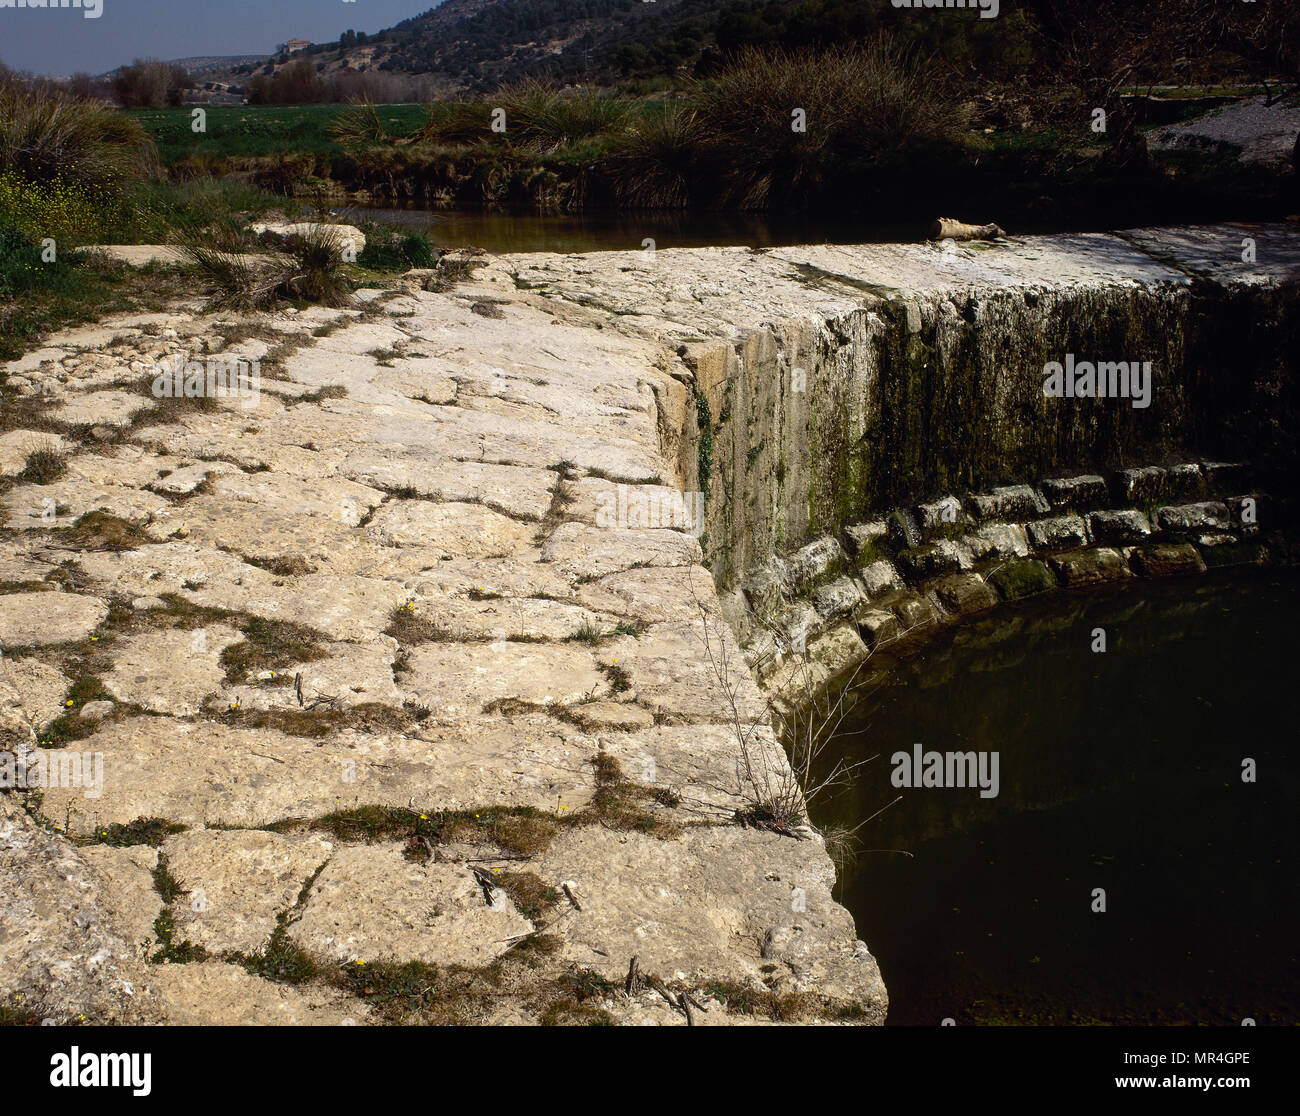 Roman dam of Barcinas. It was built between the 1st and 2nd centuries BC.  to contain the waters of the Cubillas river. Deifontes, province of  Granada, Andalusia, Spain Stock Photo - Alamy